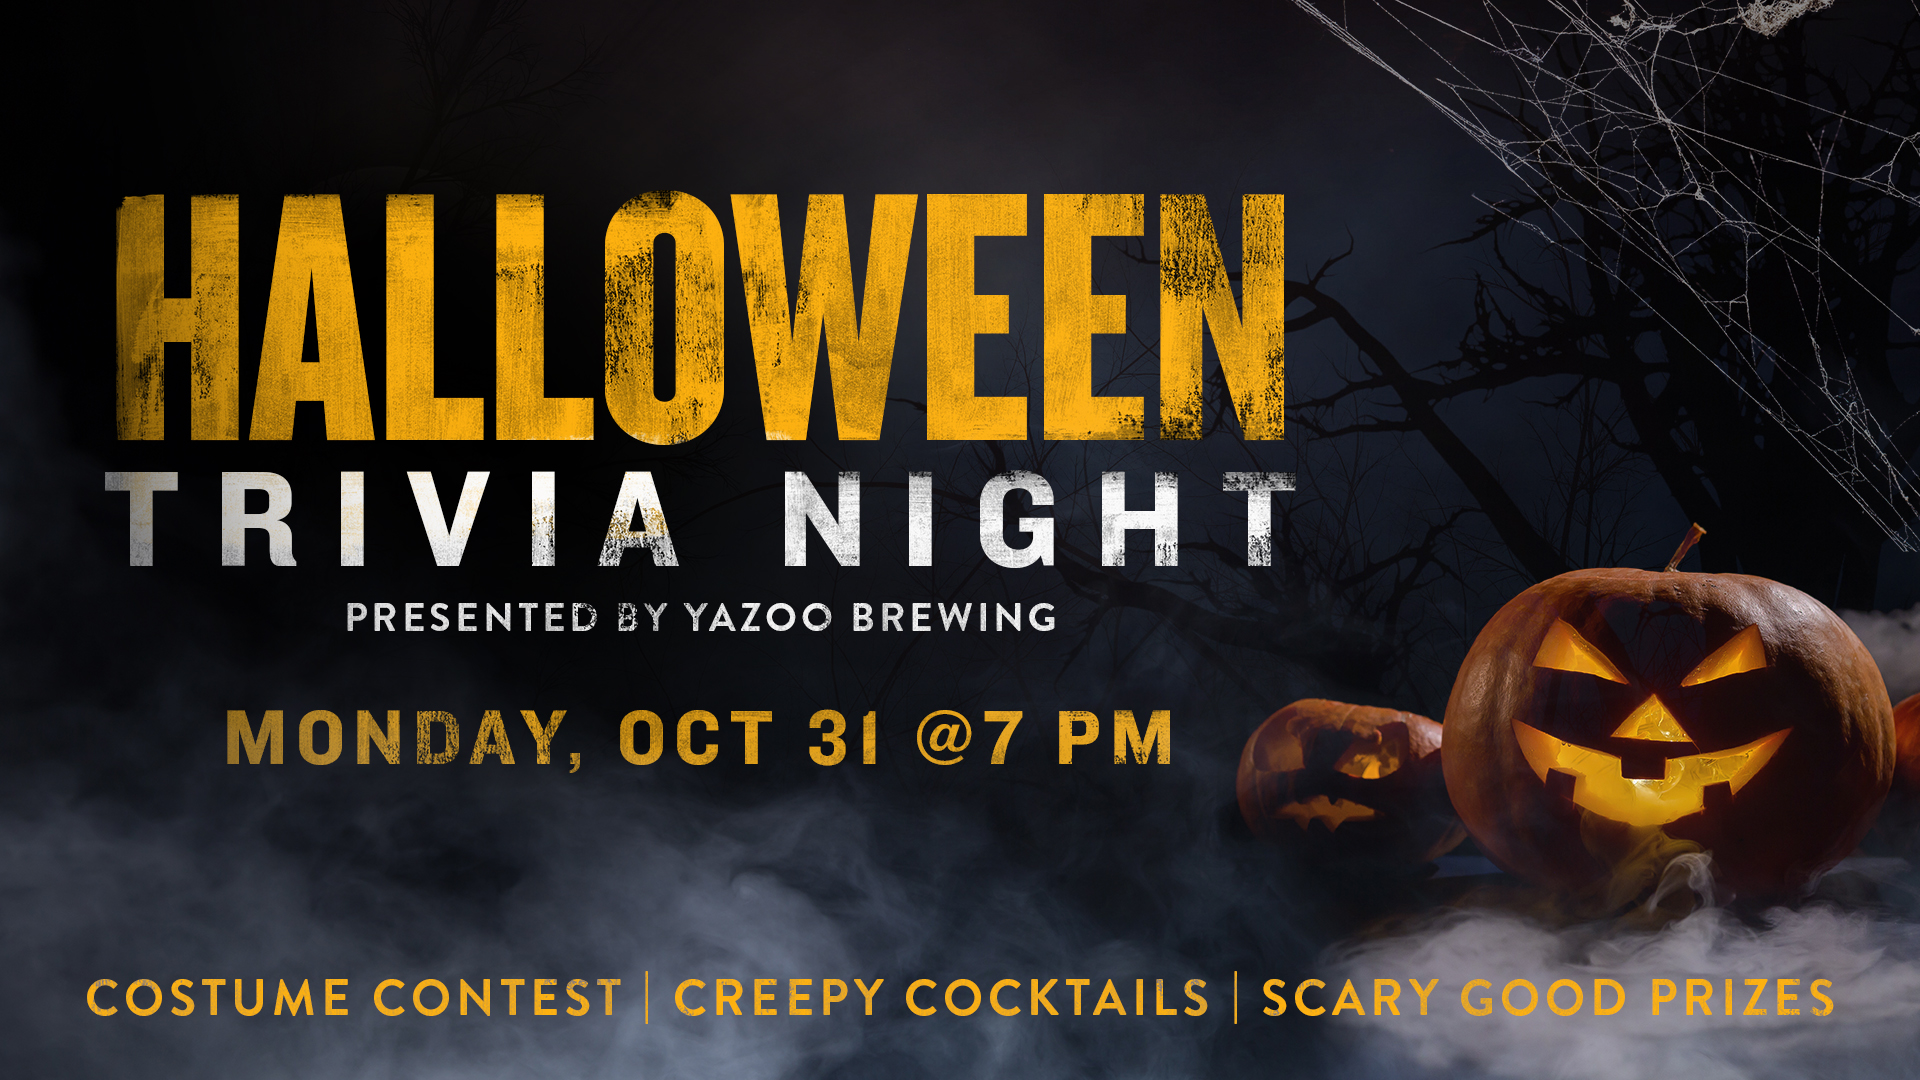 Promo image of Halloween Trivia at Assembly Food Hall